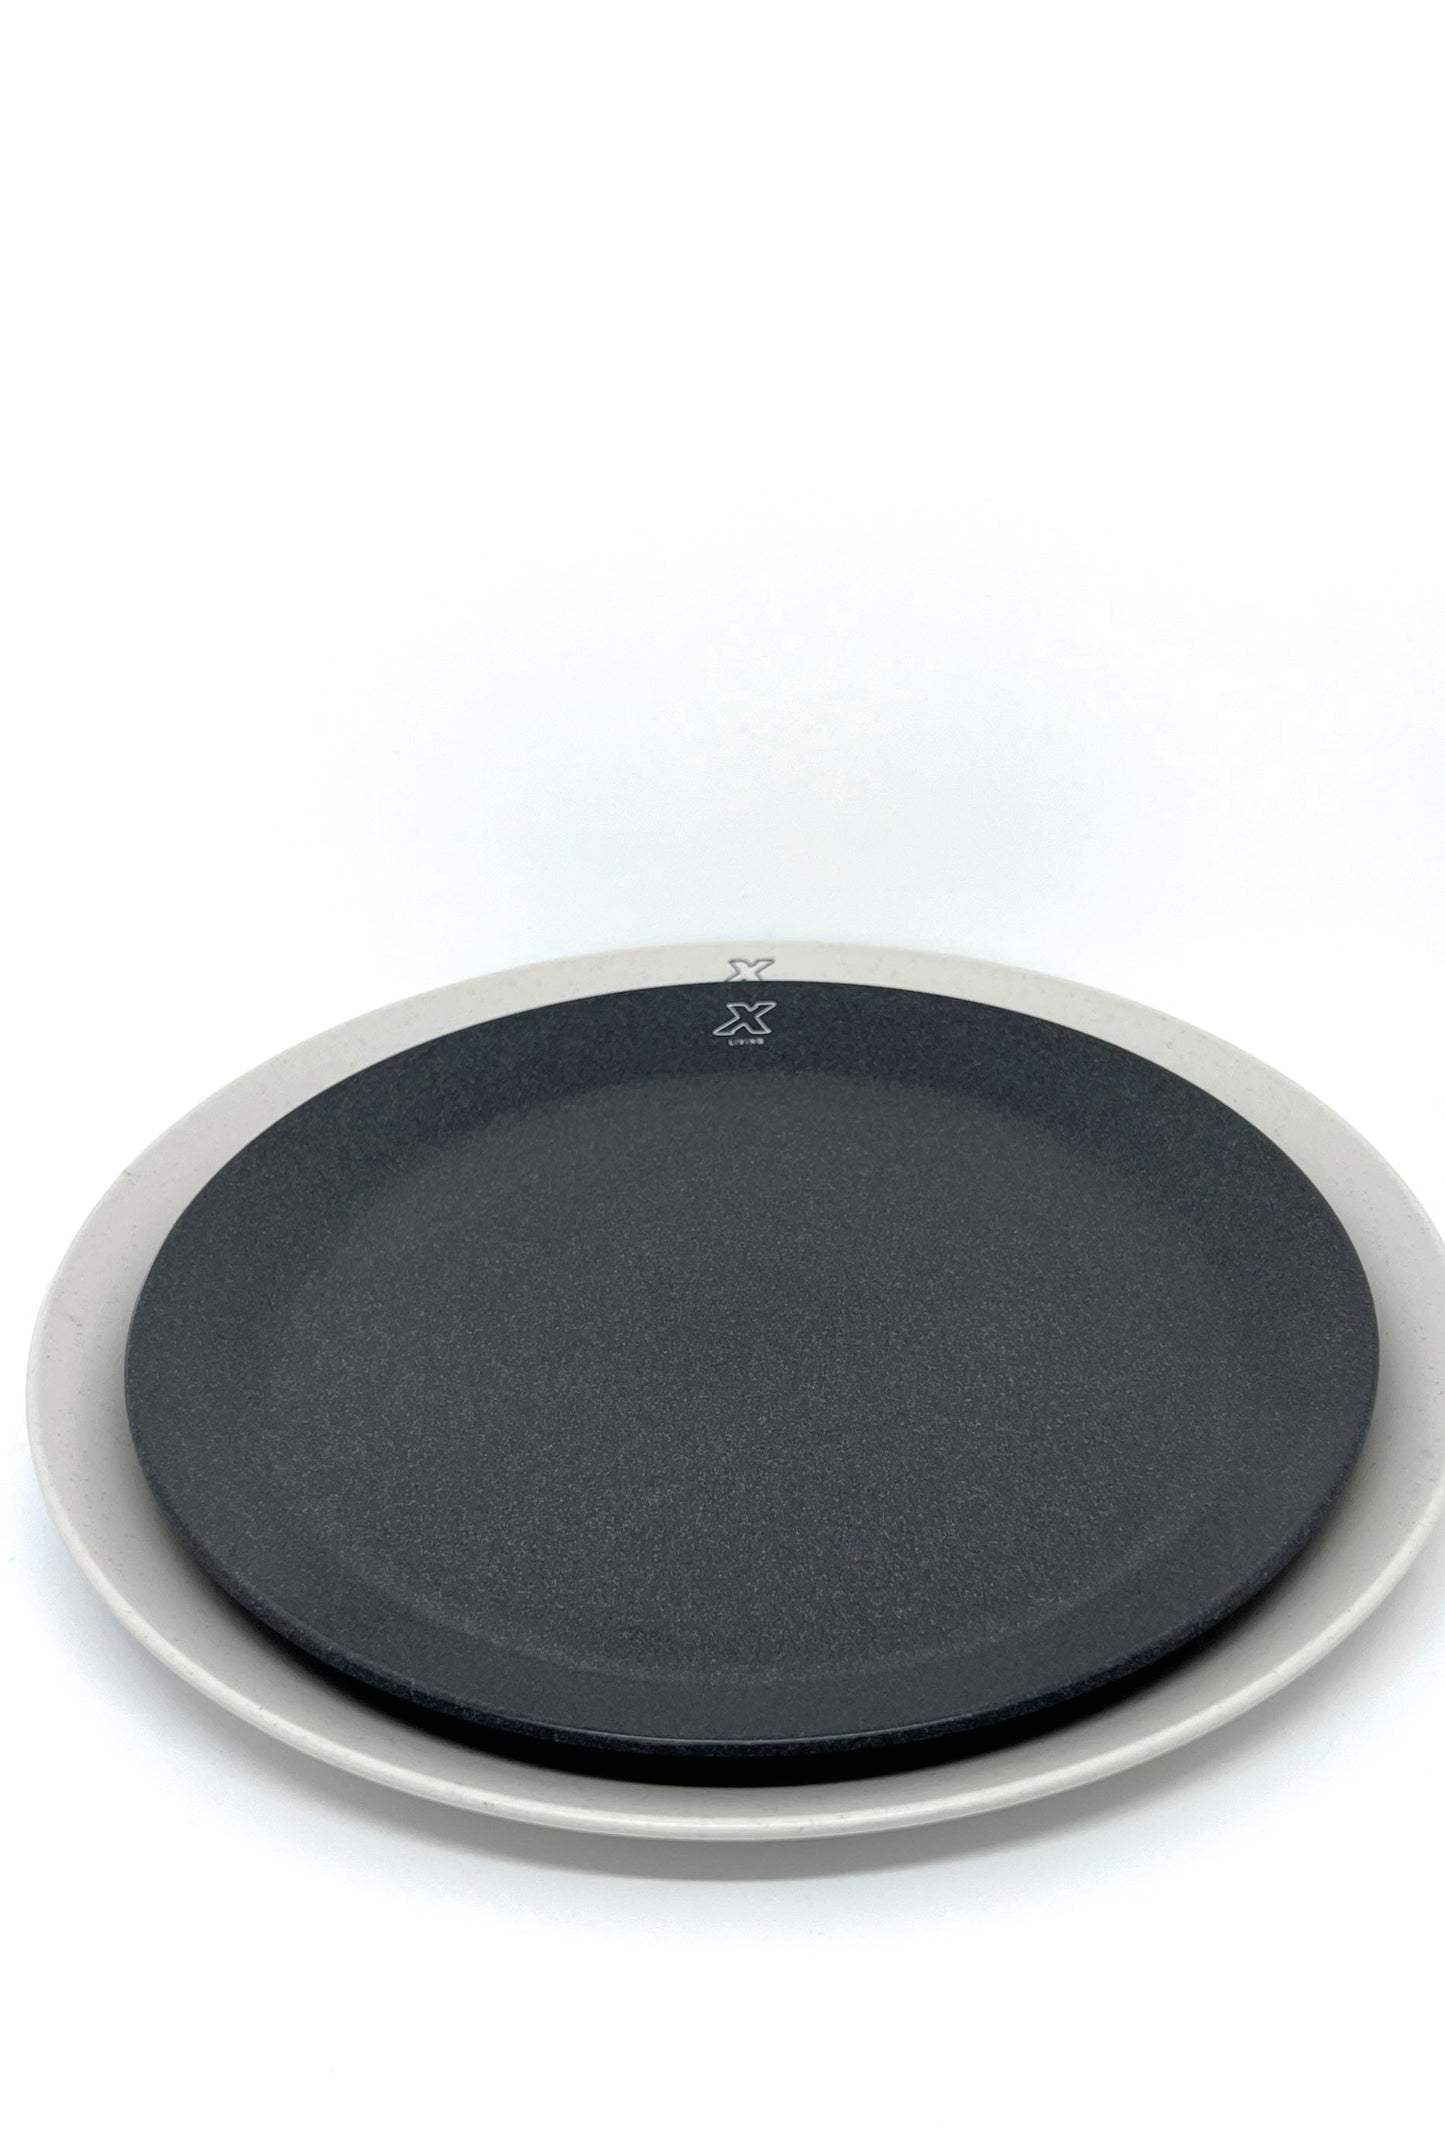 Lunch plate - Pebble black (240 mm.)